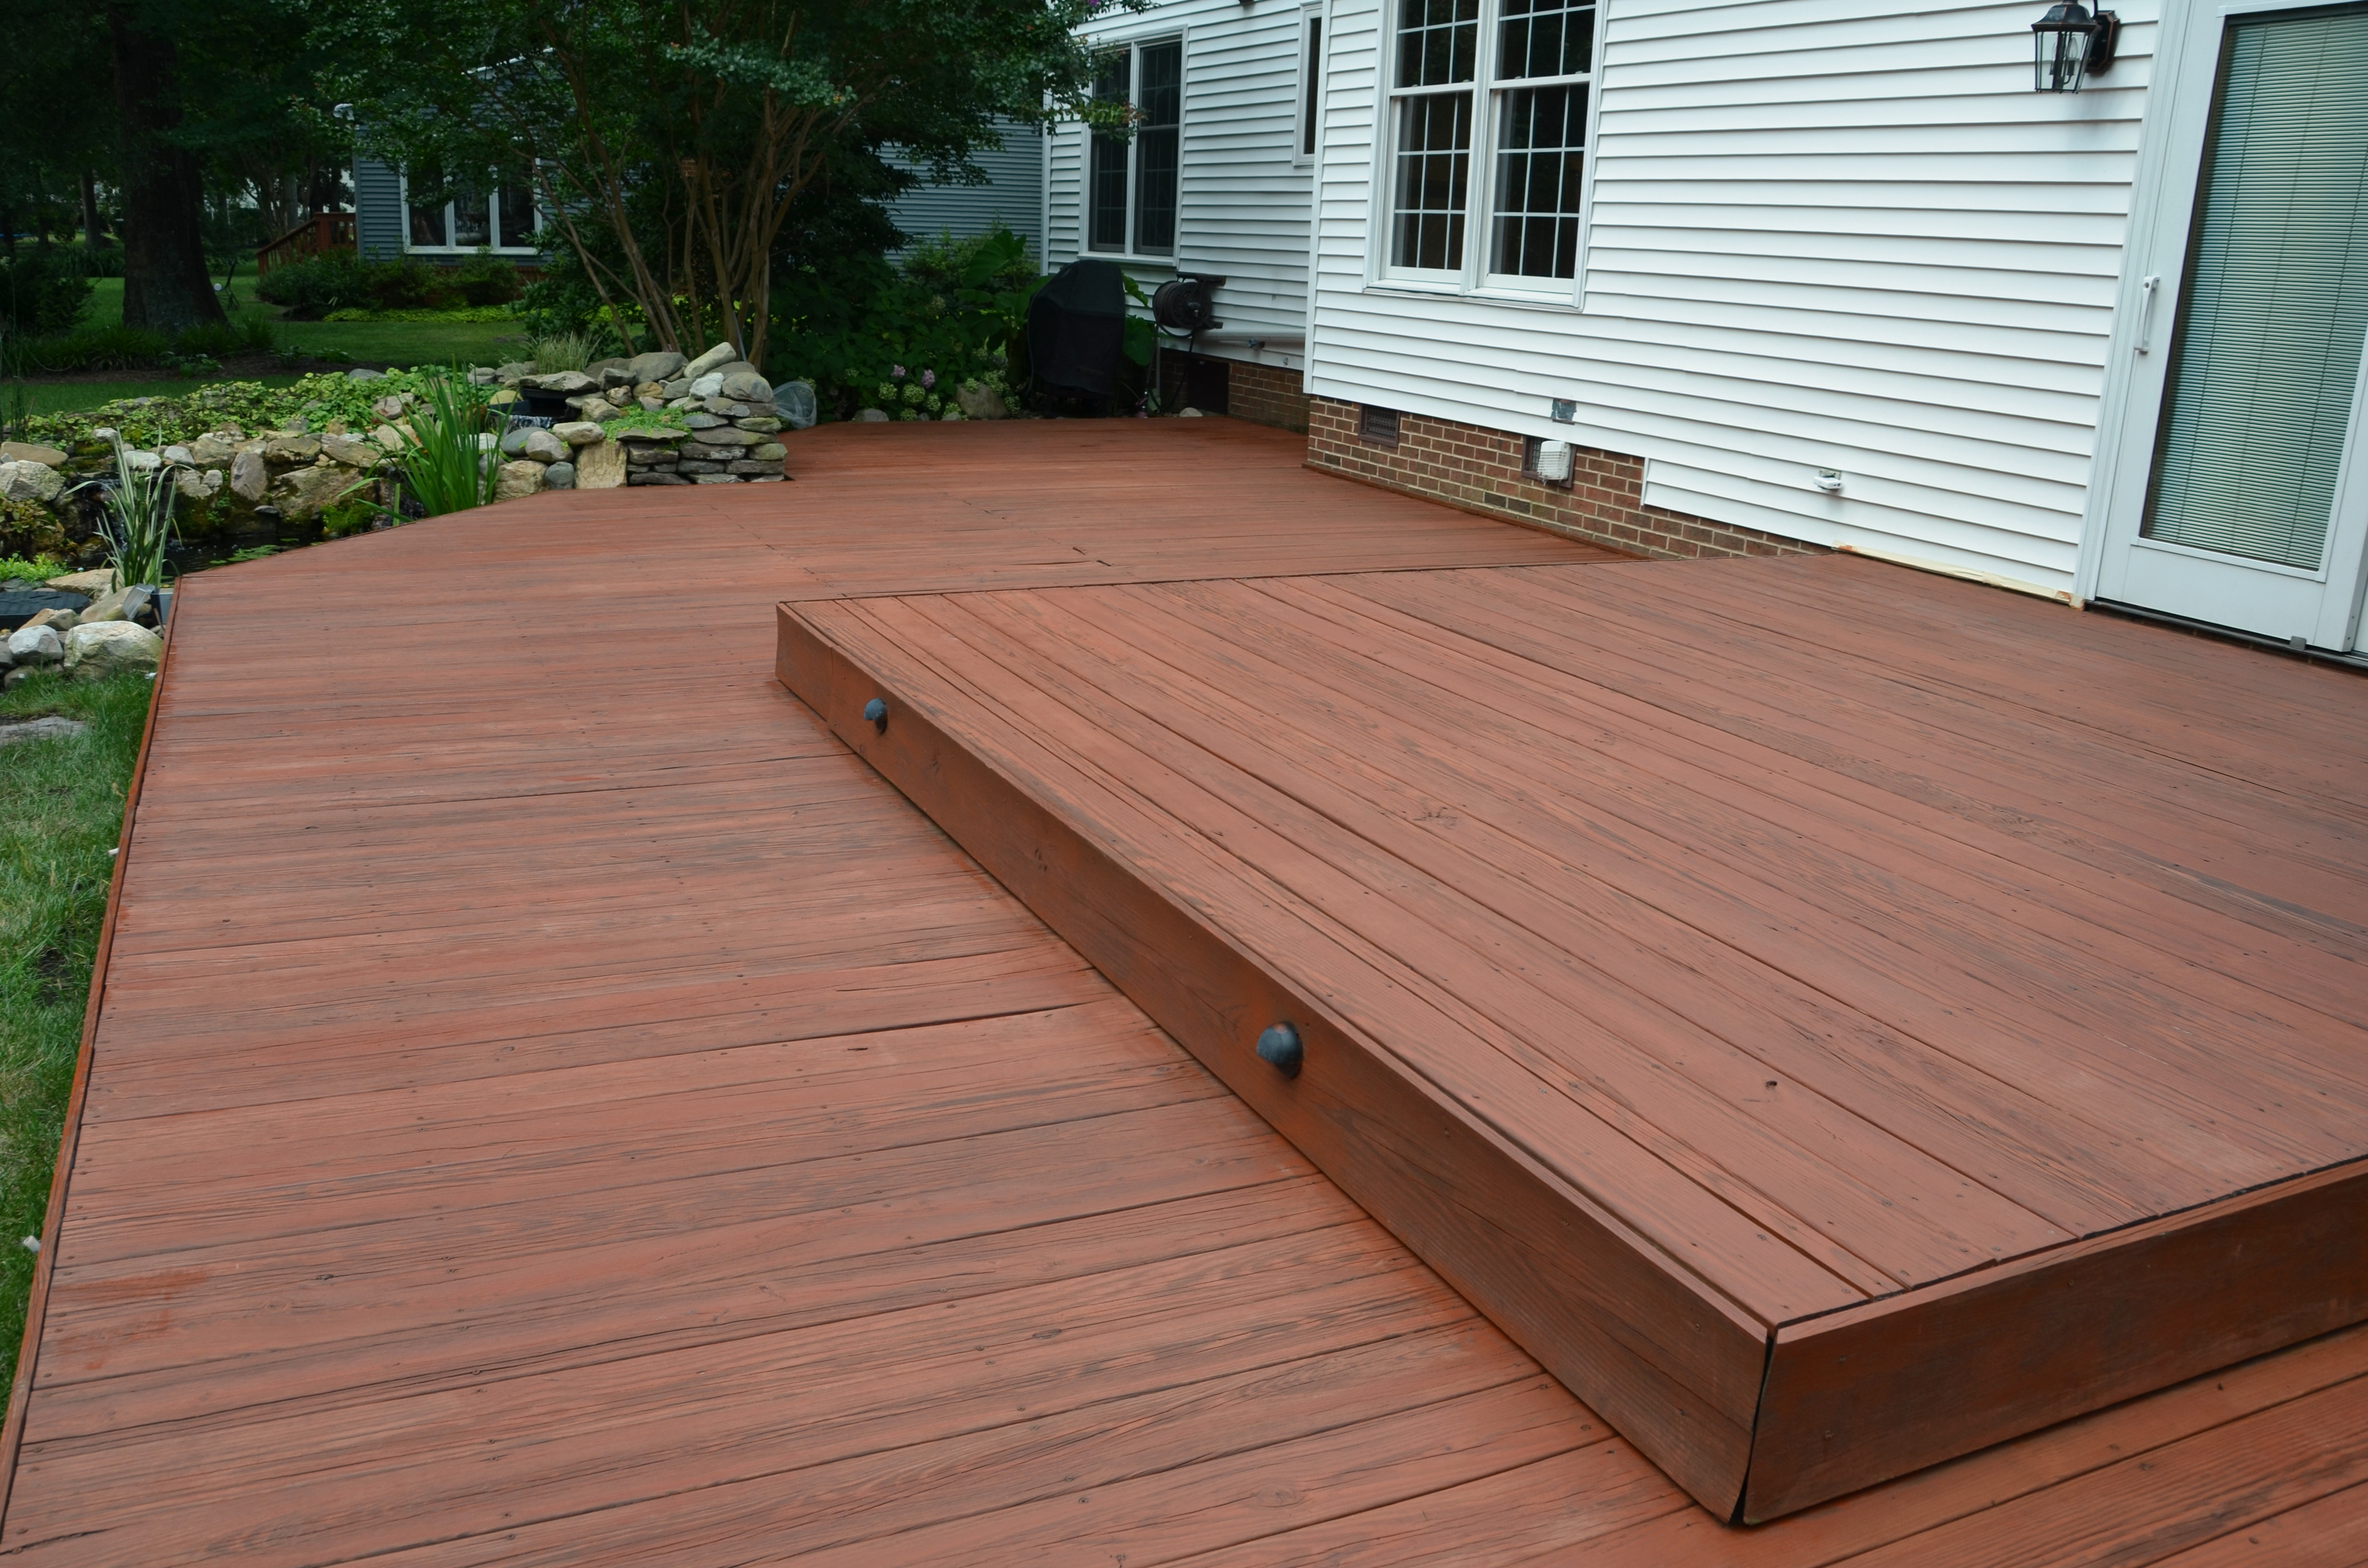 Deck Stain Colors Lowes | Home Design Ideas